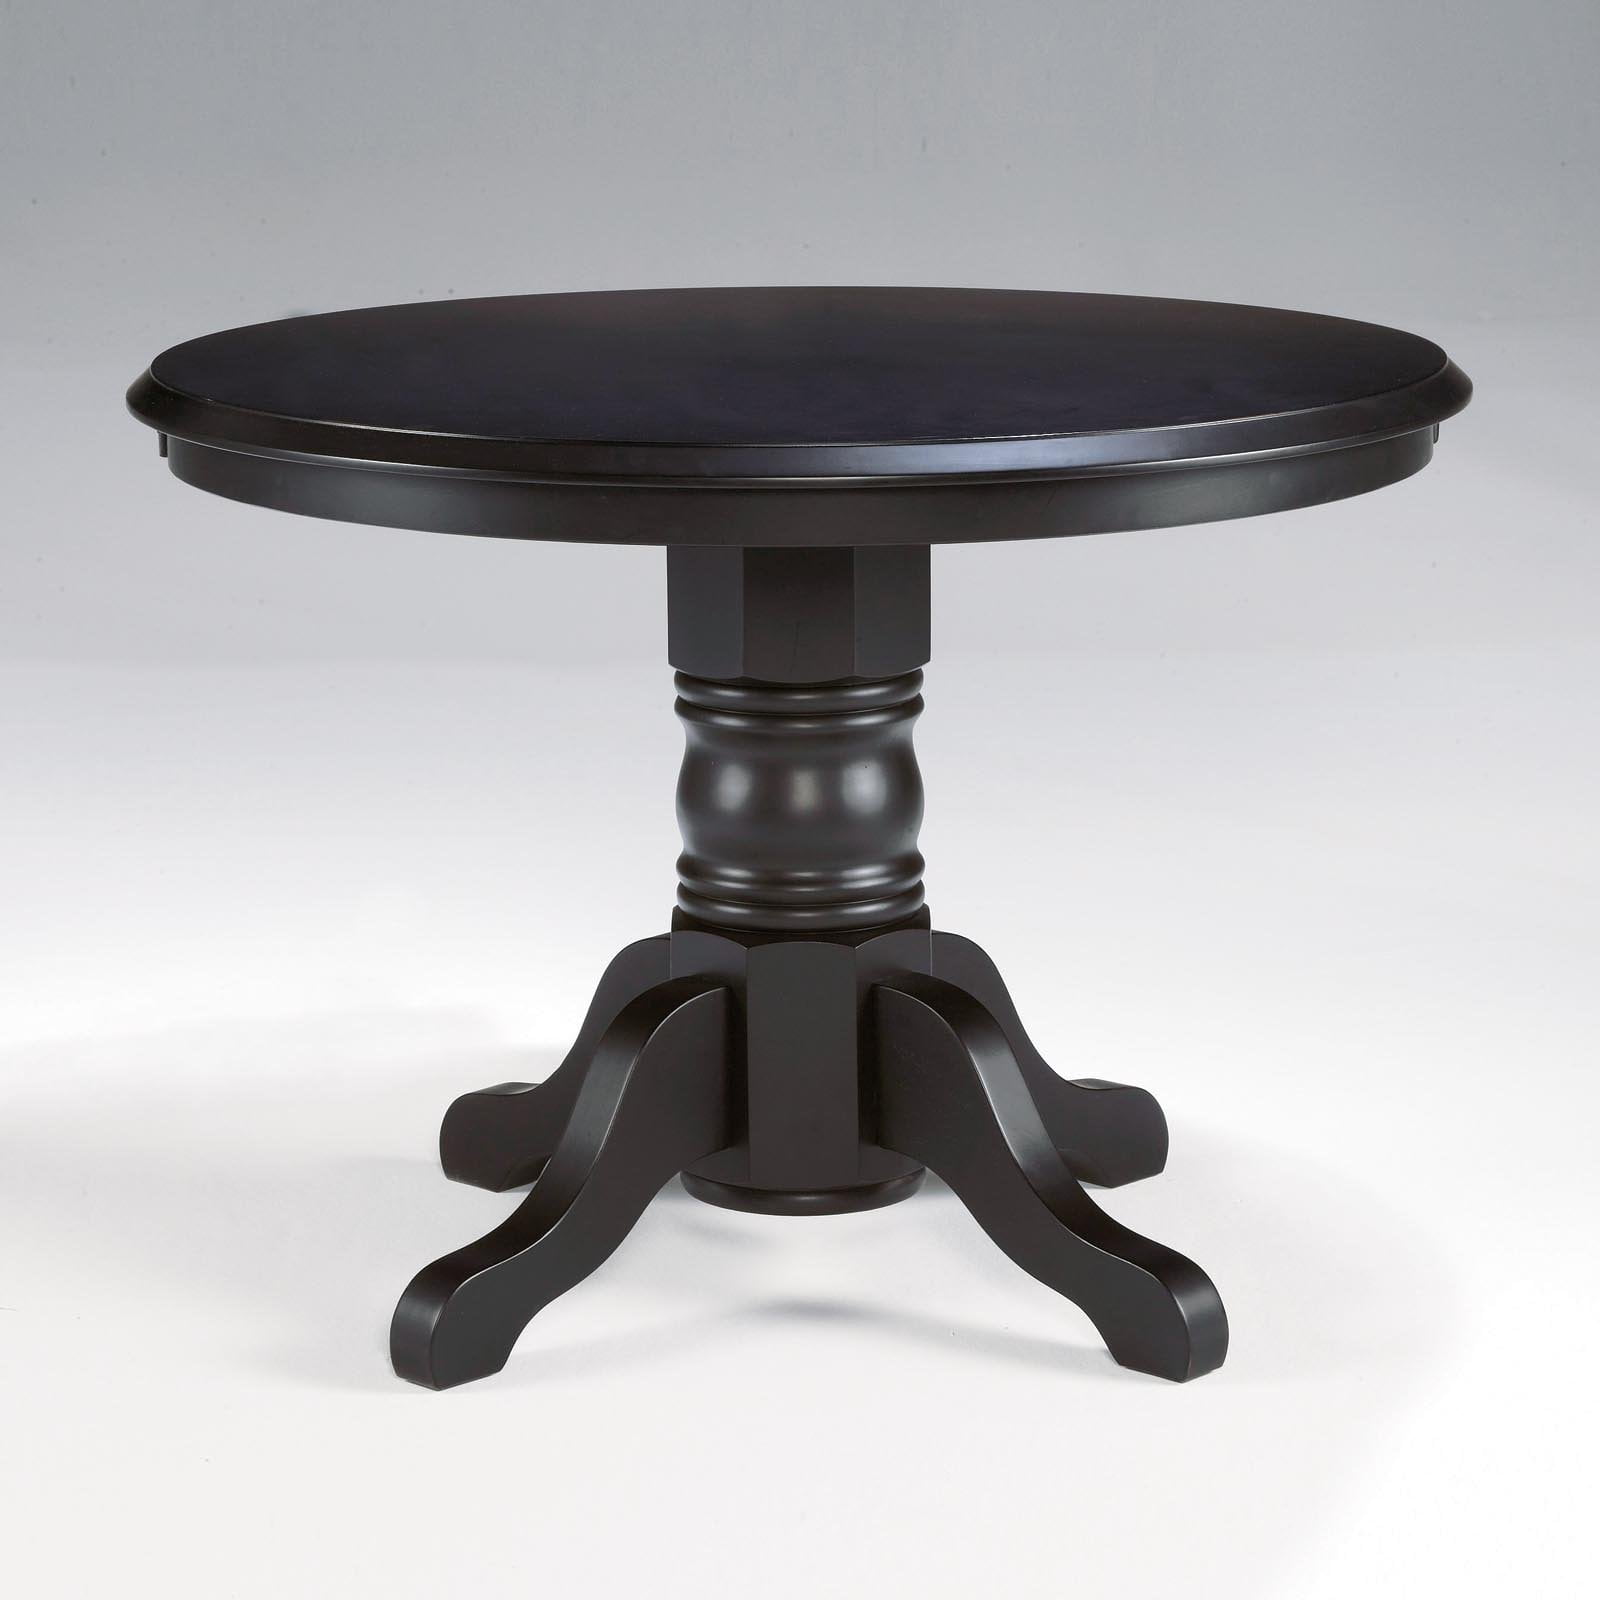 Home Styles Round 42 in. Pedestal Dining Table  Walmart.com